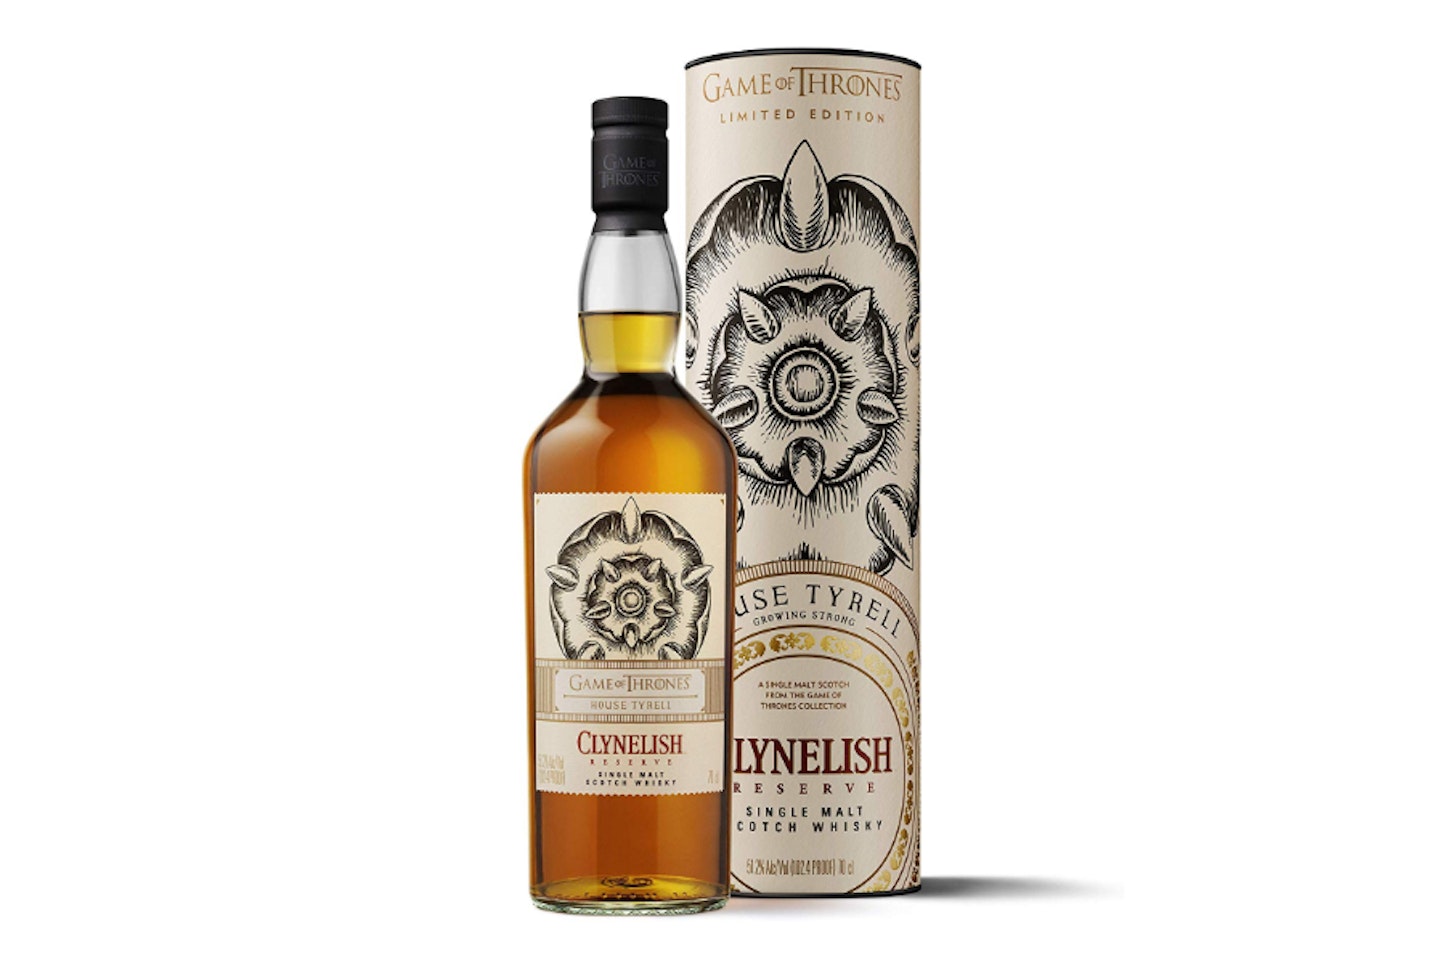 Game of Thrones House Tyrell – Clynelish Reserve, 700cl, 51.2%, £42.55